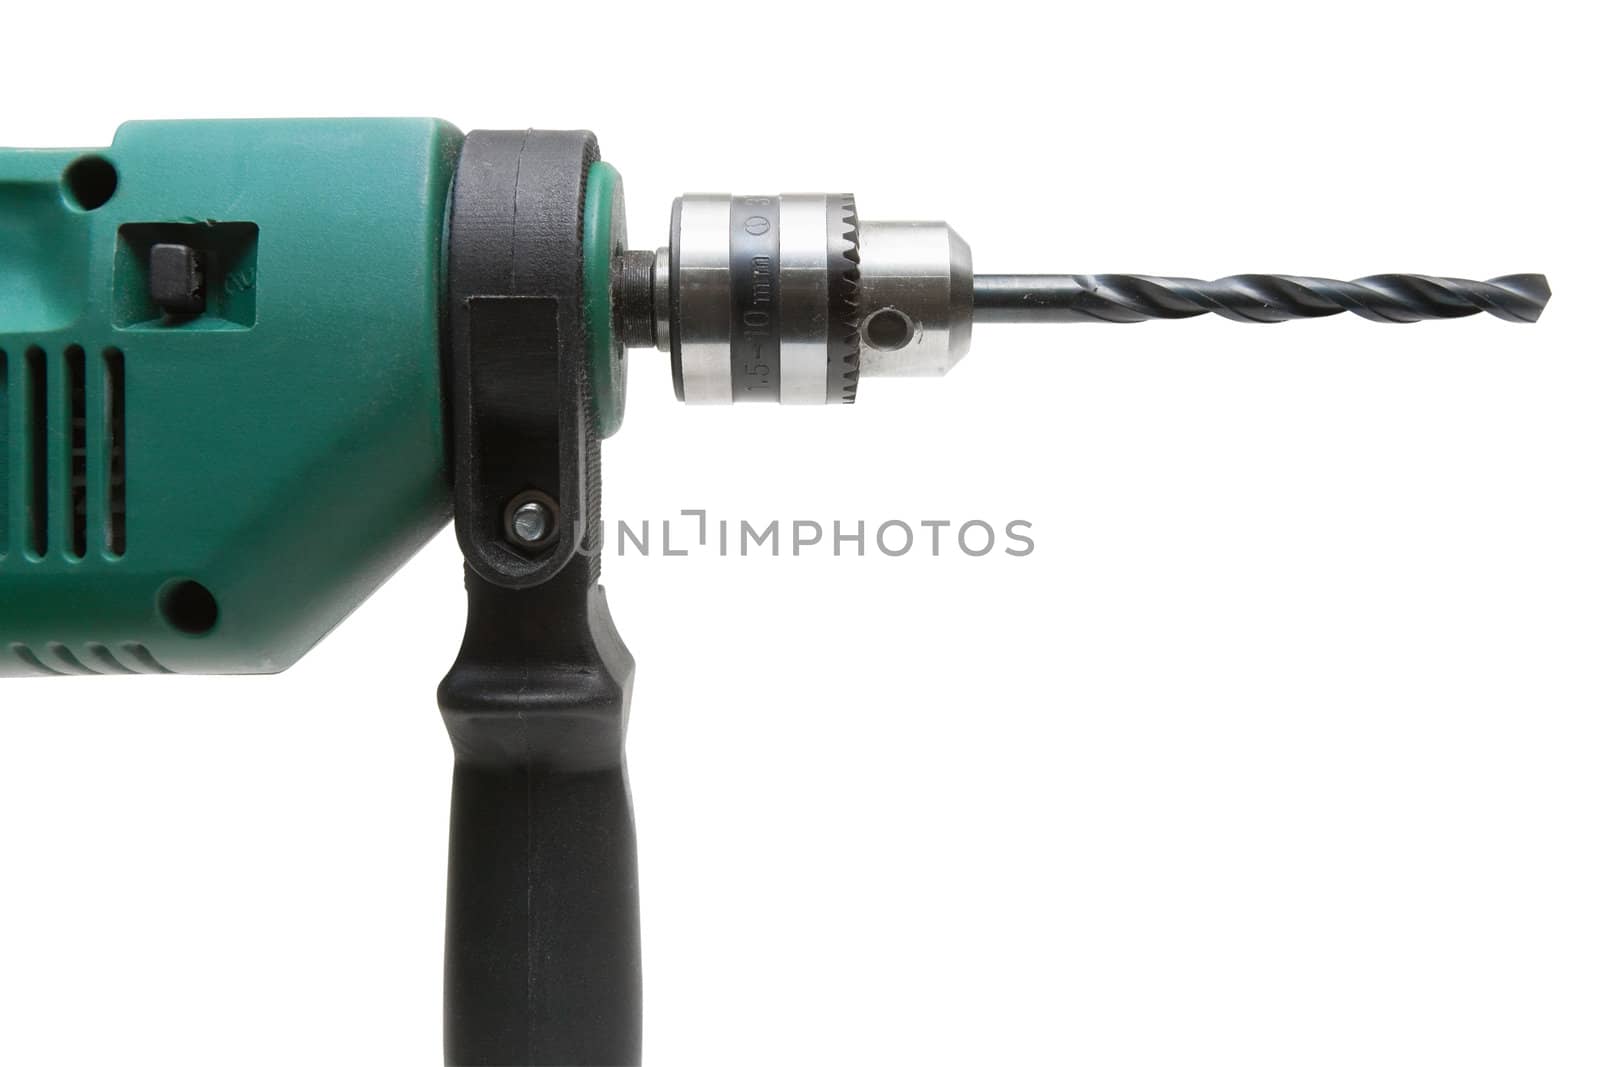 Electric drilling machine isolated on a white background. Clipping path.